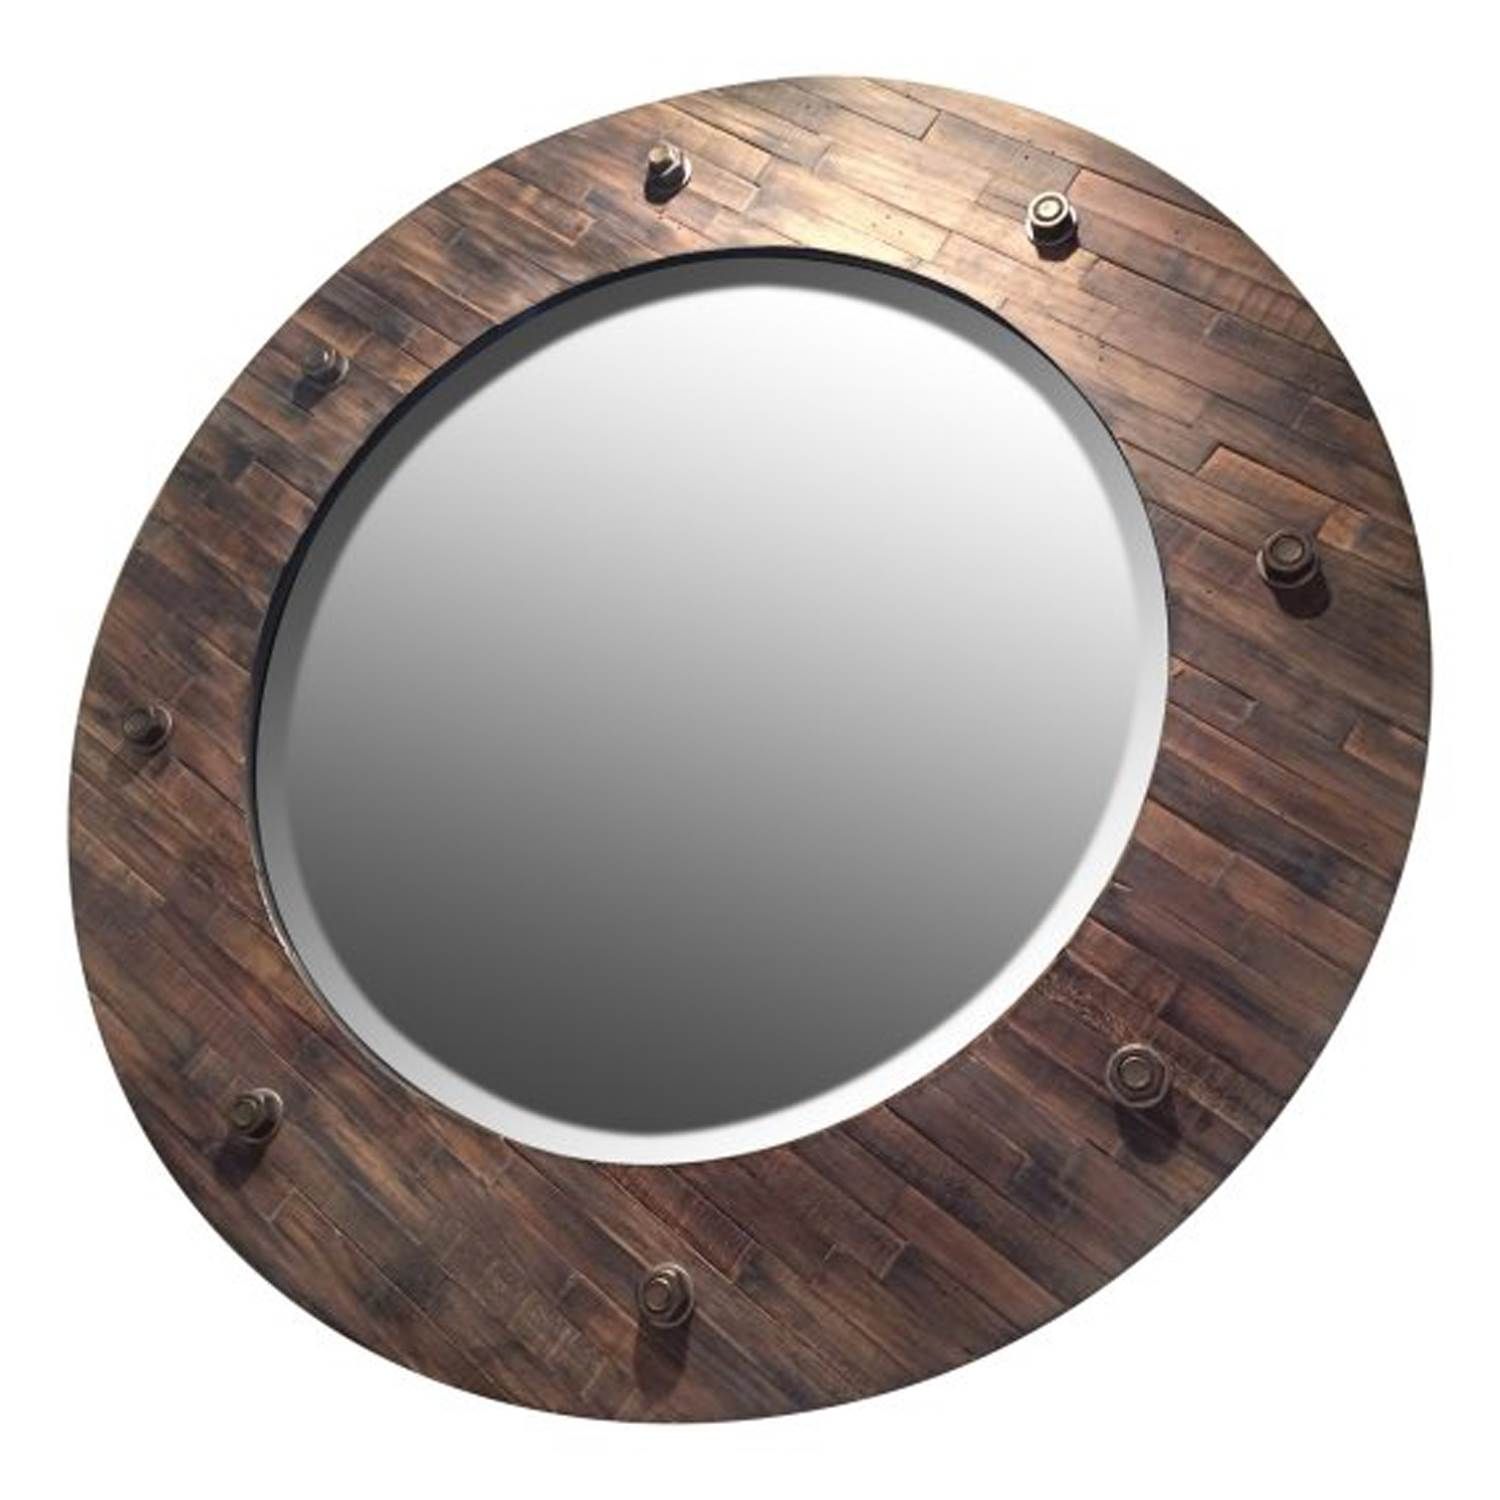 Majestic 32" Rustic Round Wood Beveled Glass Frame Decorative Wall With Window Cream Wood Wall Mirrors (View 4 of 15)